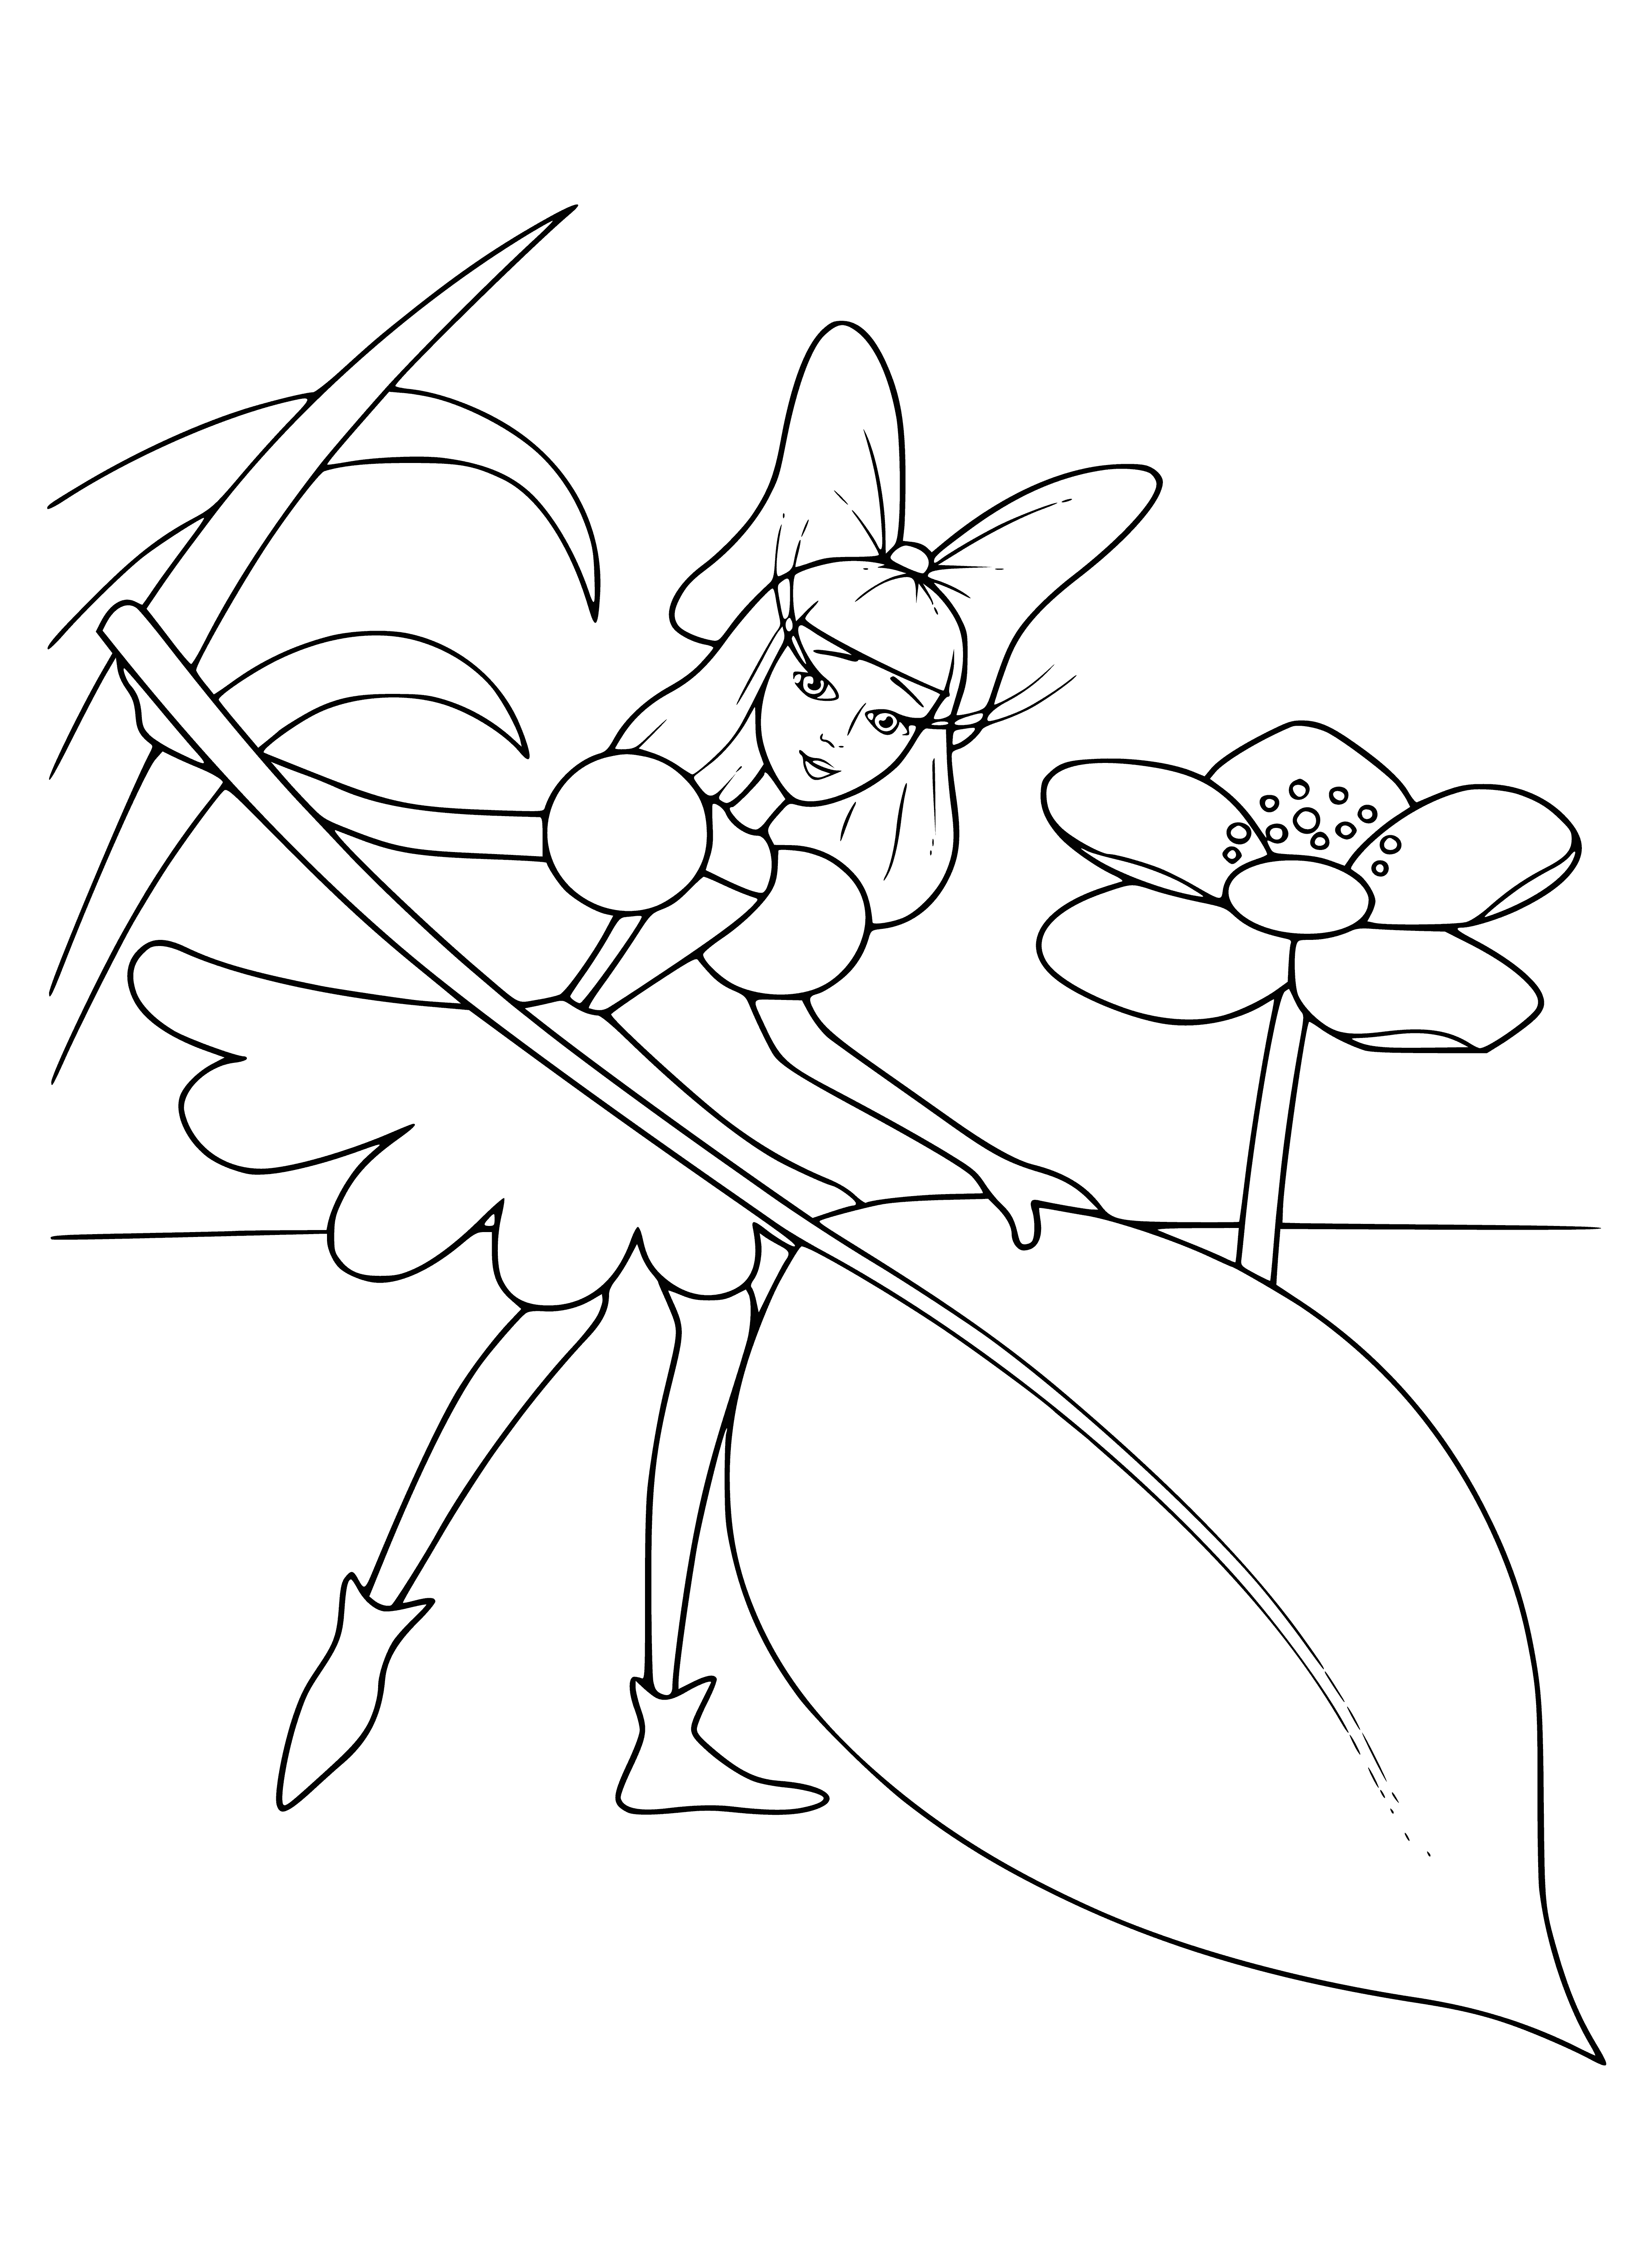 coloring page: Thumbelina stands in a grassy field looking up at a blue sky with clouds. She holds a giant leaf.